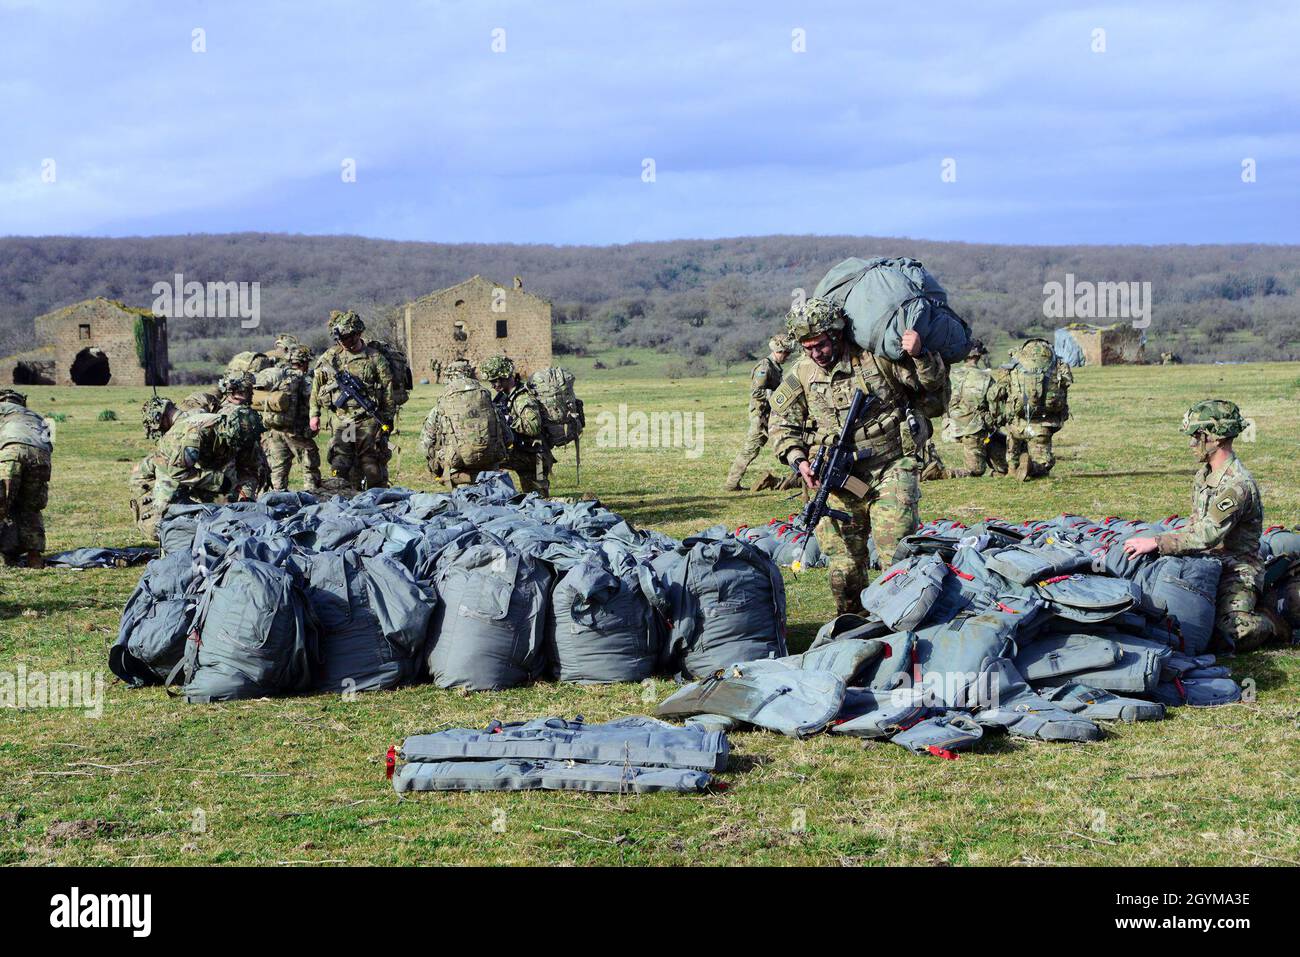 U.S. Army paratroopers from HHC, 2nd Battalion, 503rd  Infantry Regiment, 173rd Airborne Brigade carry their parachutes to the check-in point during Exercise Rock Topside 20, Monte Romano, Italy, Jan. 29, 2020. Rock Topside is a joint forced entry exercise to train the battalion’s ability to conduct airborne contingency response force operations. This training stresses the interoperability of both the paratroopers of the 2nd Battalion, 503rd Infantry Regiment and Italian paratroopers of Reggimento Savoia Cavalleria 3. (U.S Army photo by Elena Baladelli) Stock Photo